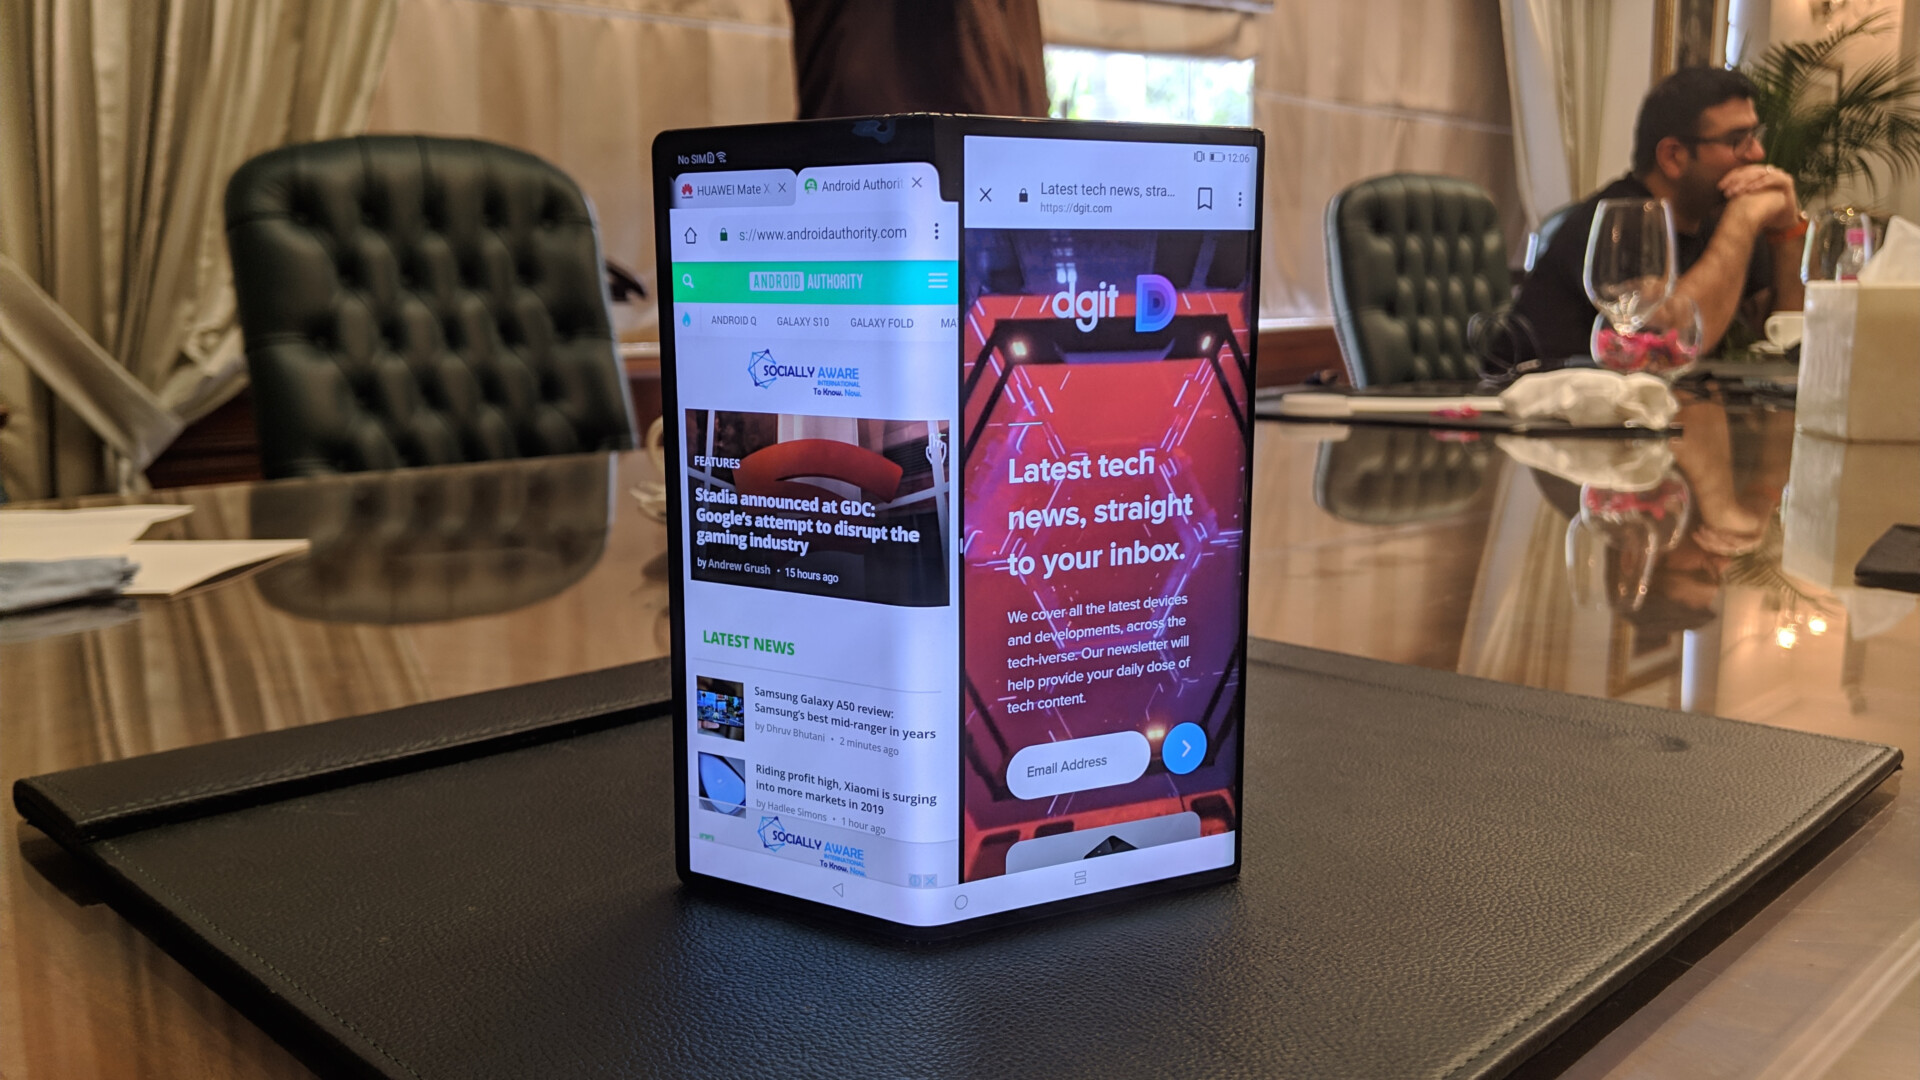 HUAWEI Mate X Folded Display with Dgit and Android Authority Split